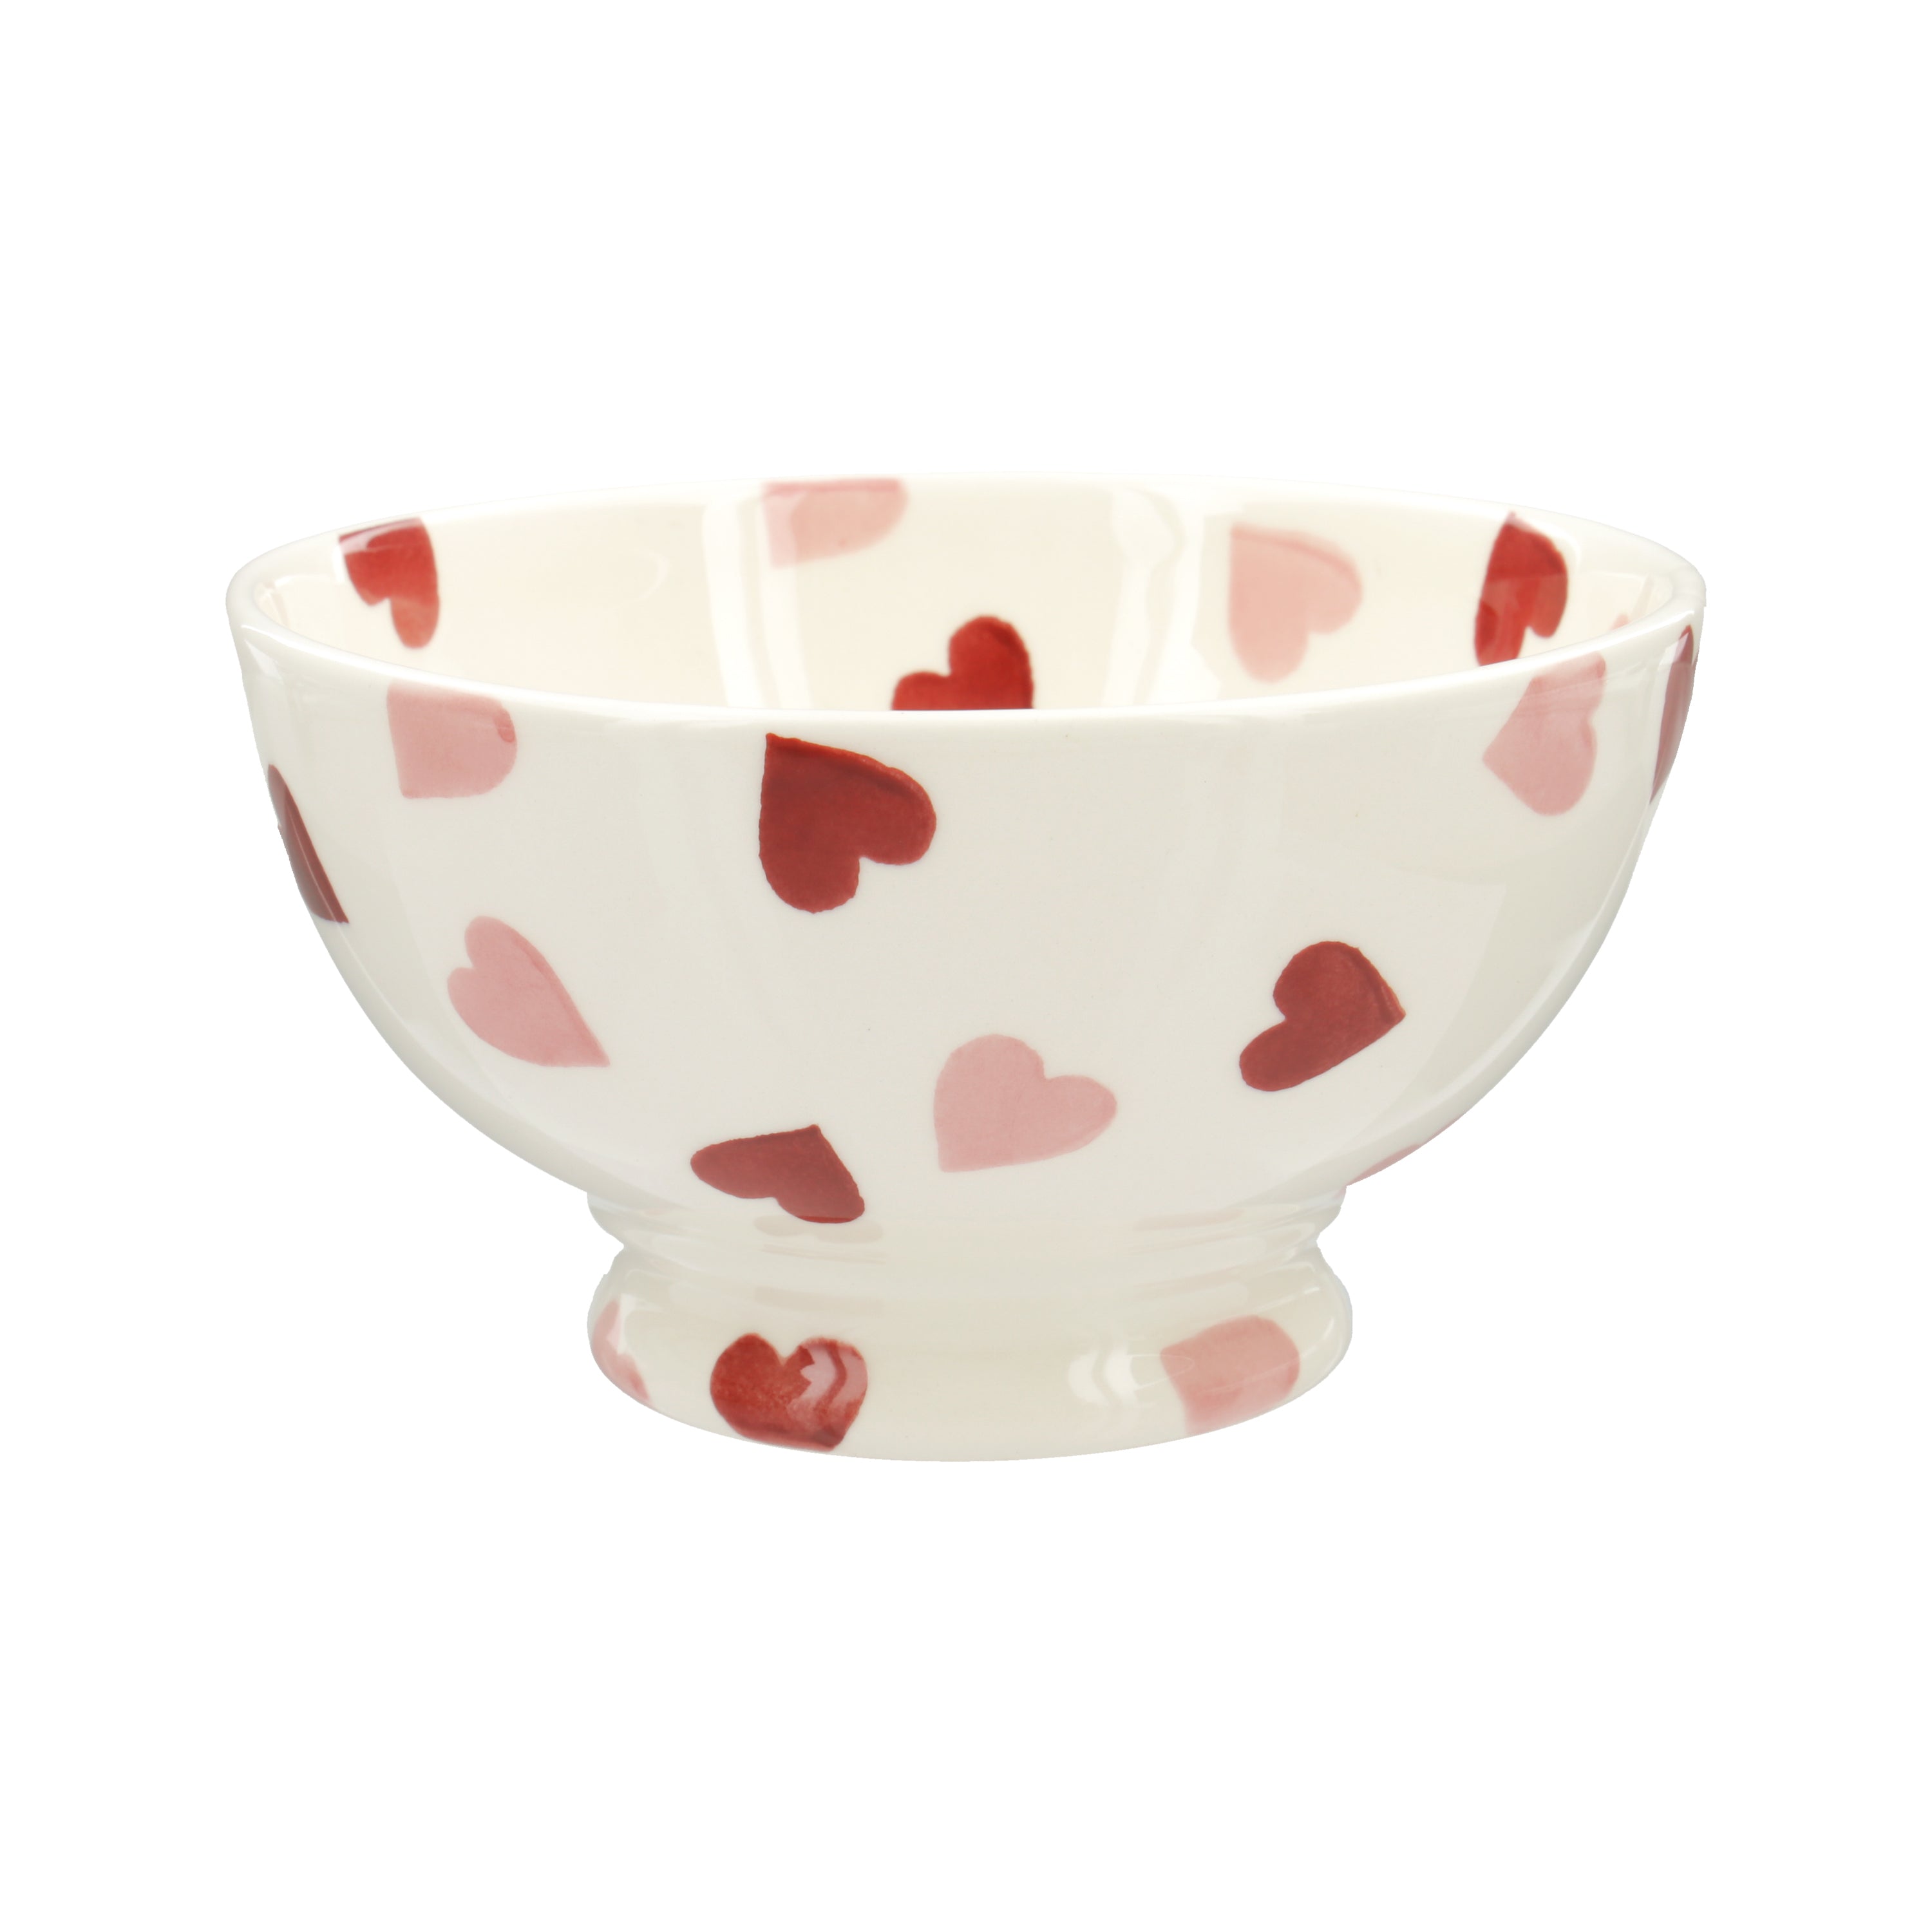 Seconds Pink Hearts French Bowl - Unique Handmade & Handpainted English Earthenware Decorative Plate